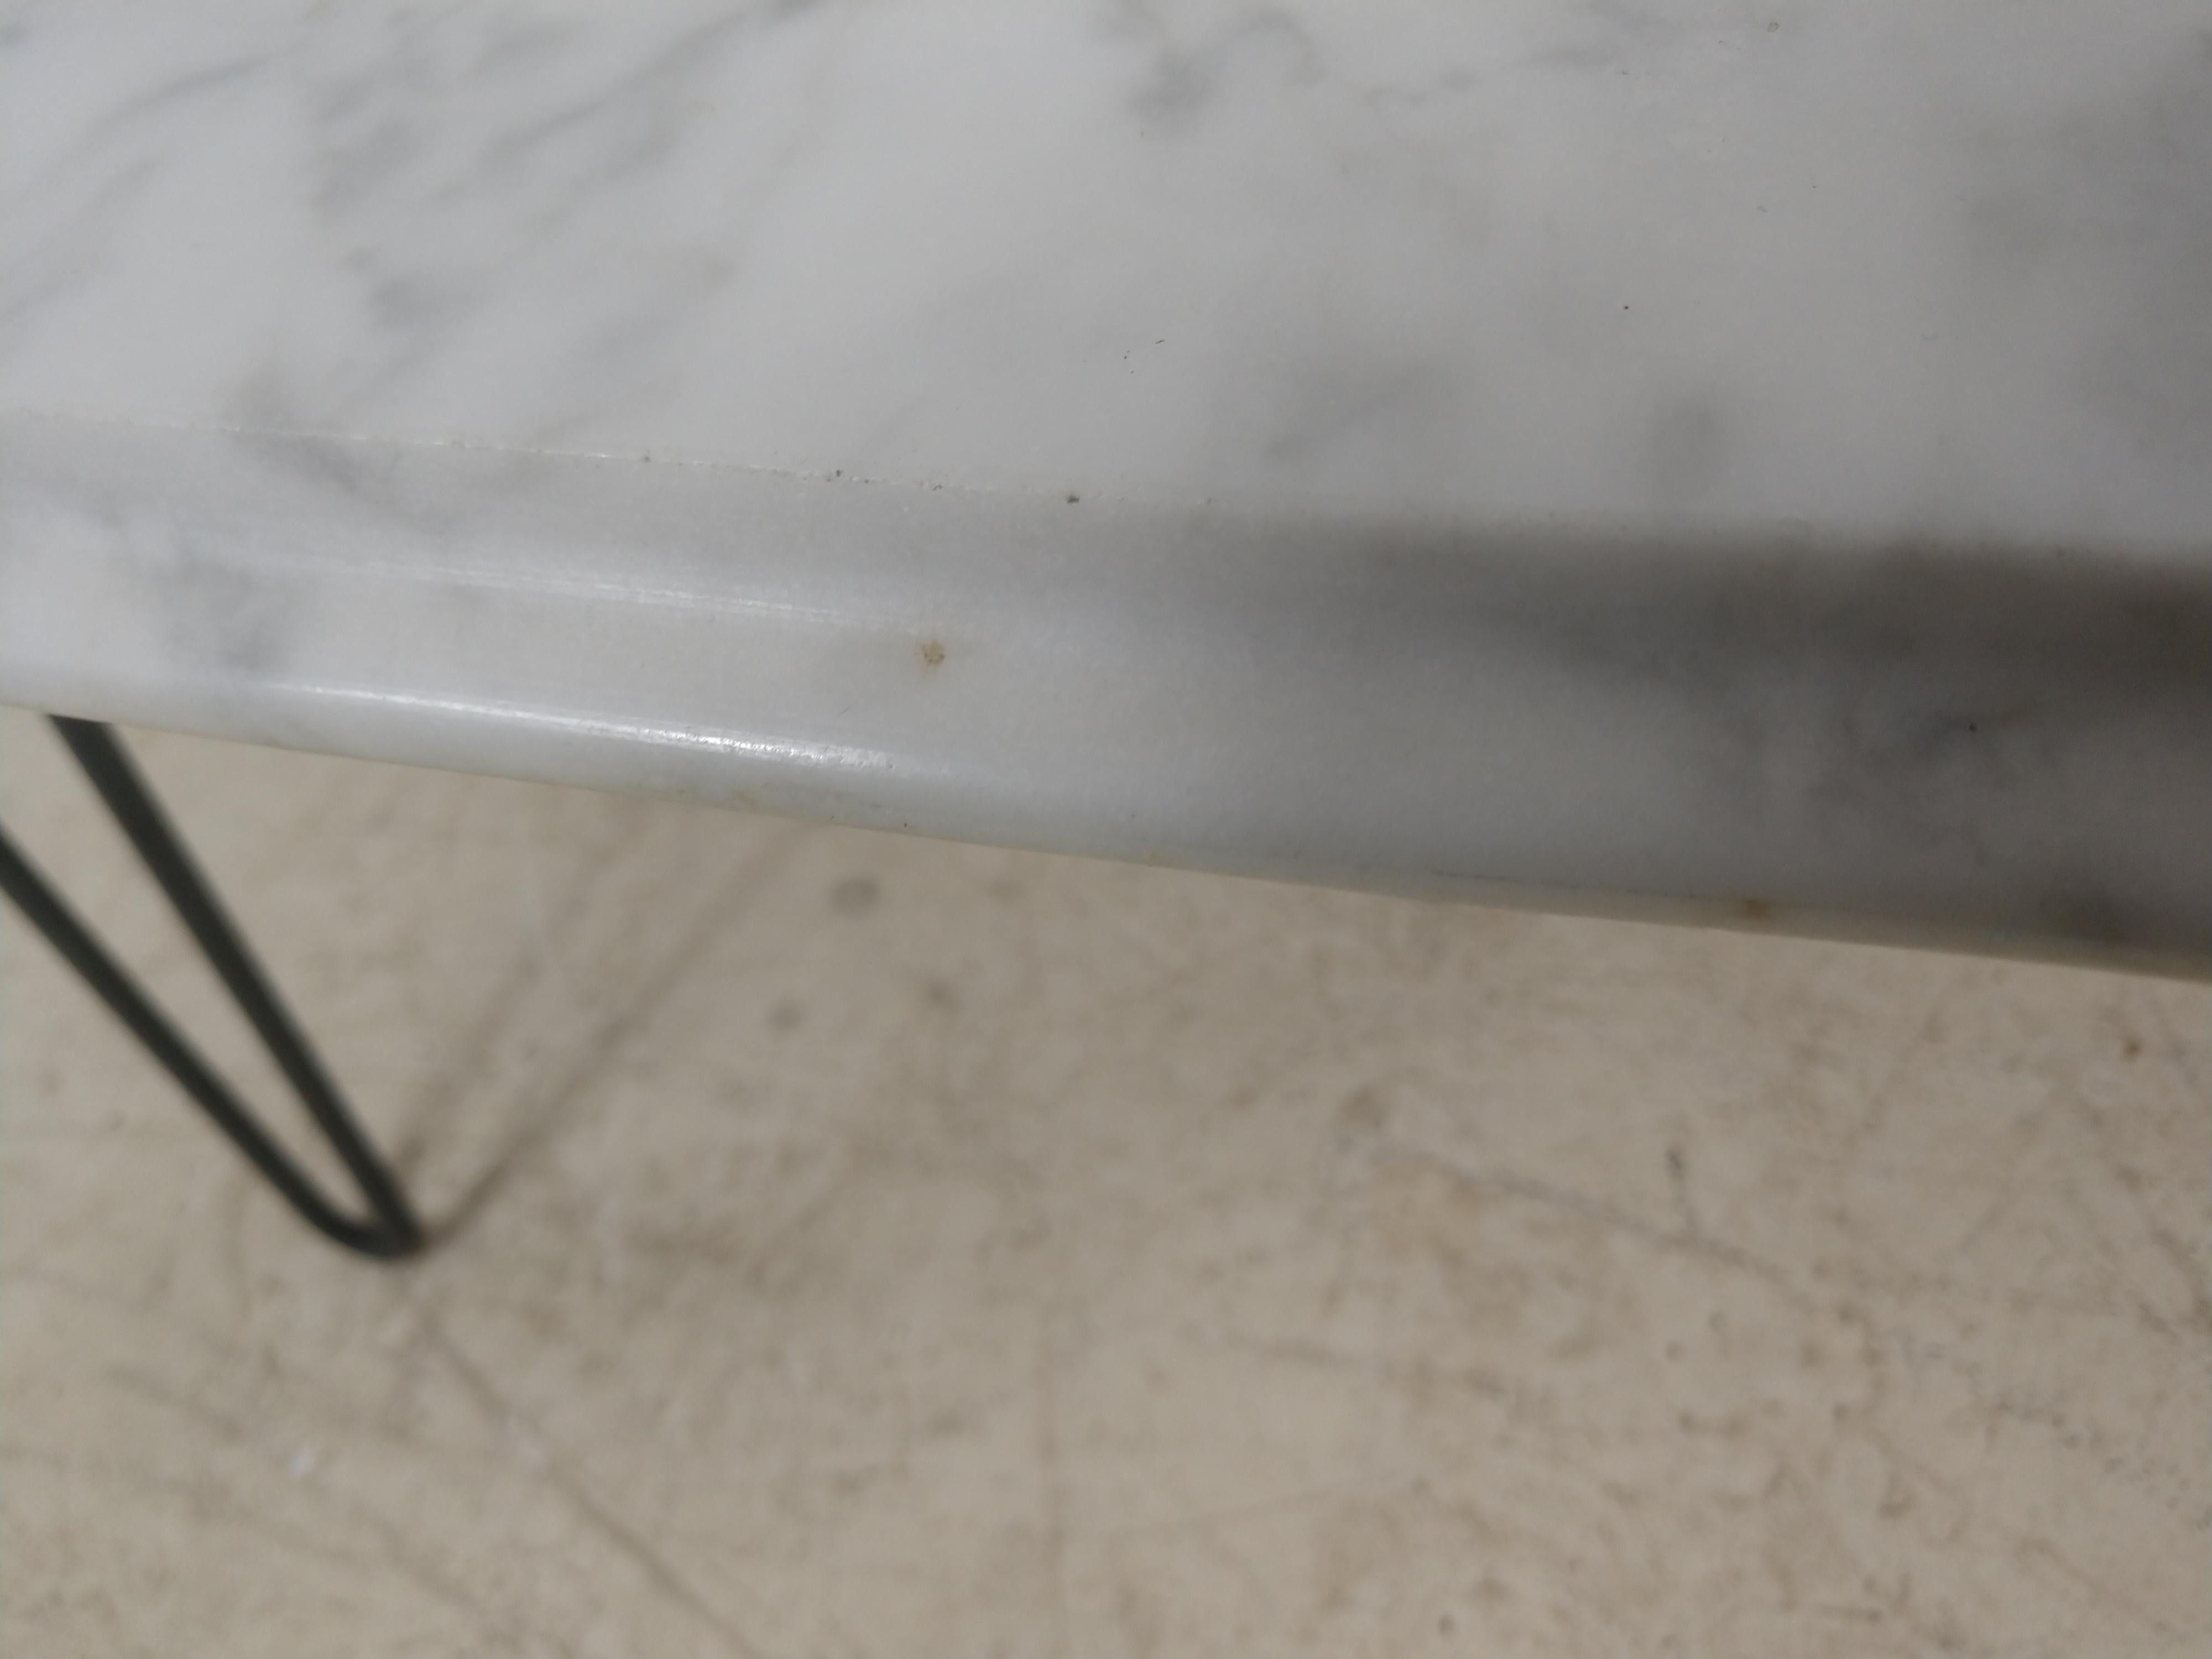 Fabulous Carrara marble-top cocktail table in the form of a surfboard. White marble from Italy, with 3 hairpin legs attached to a board underneath. Marble sits comfortably on top with no teetering. 1 small flea bite to the underside.